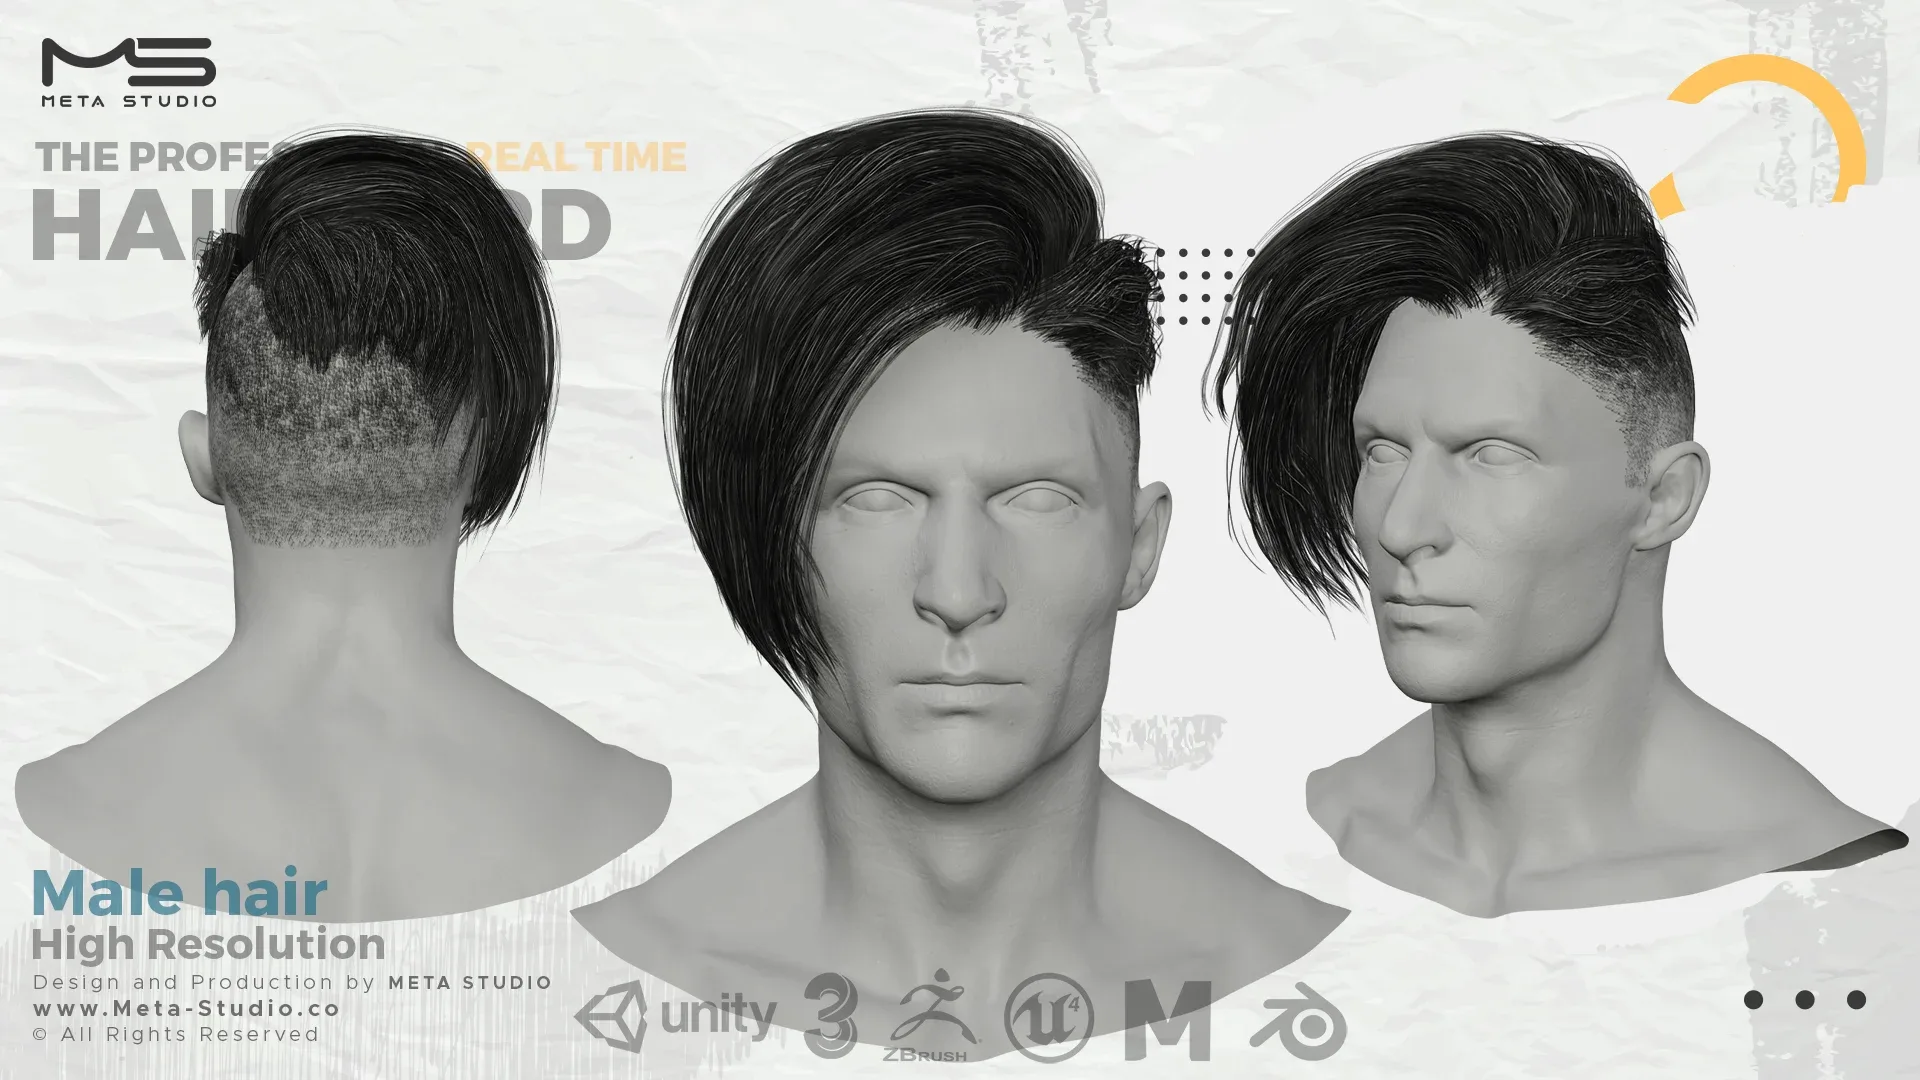 Male Hair Part 4 - Professional Realtime Hair card